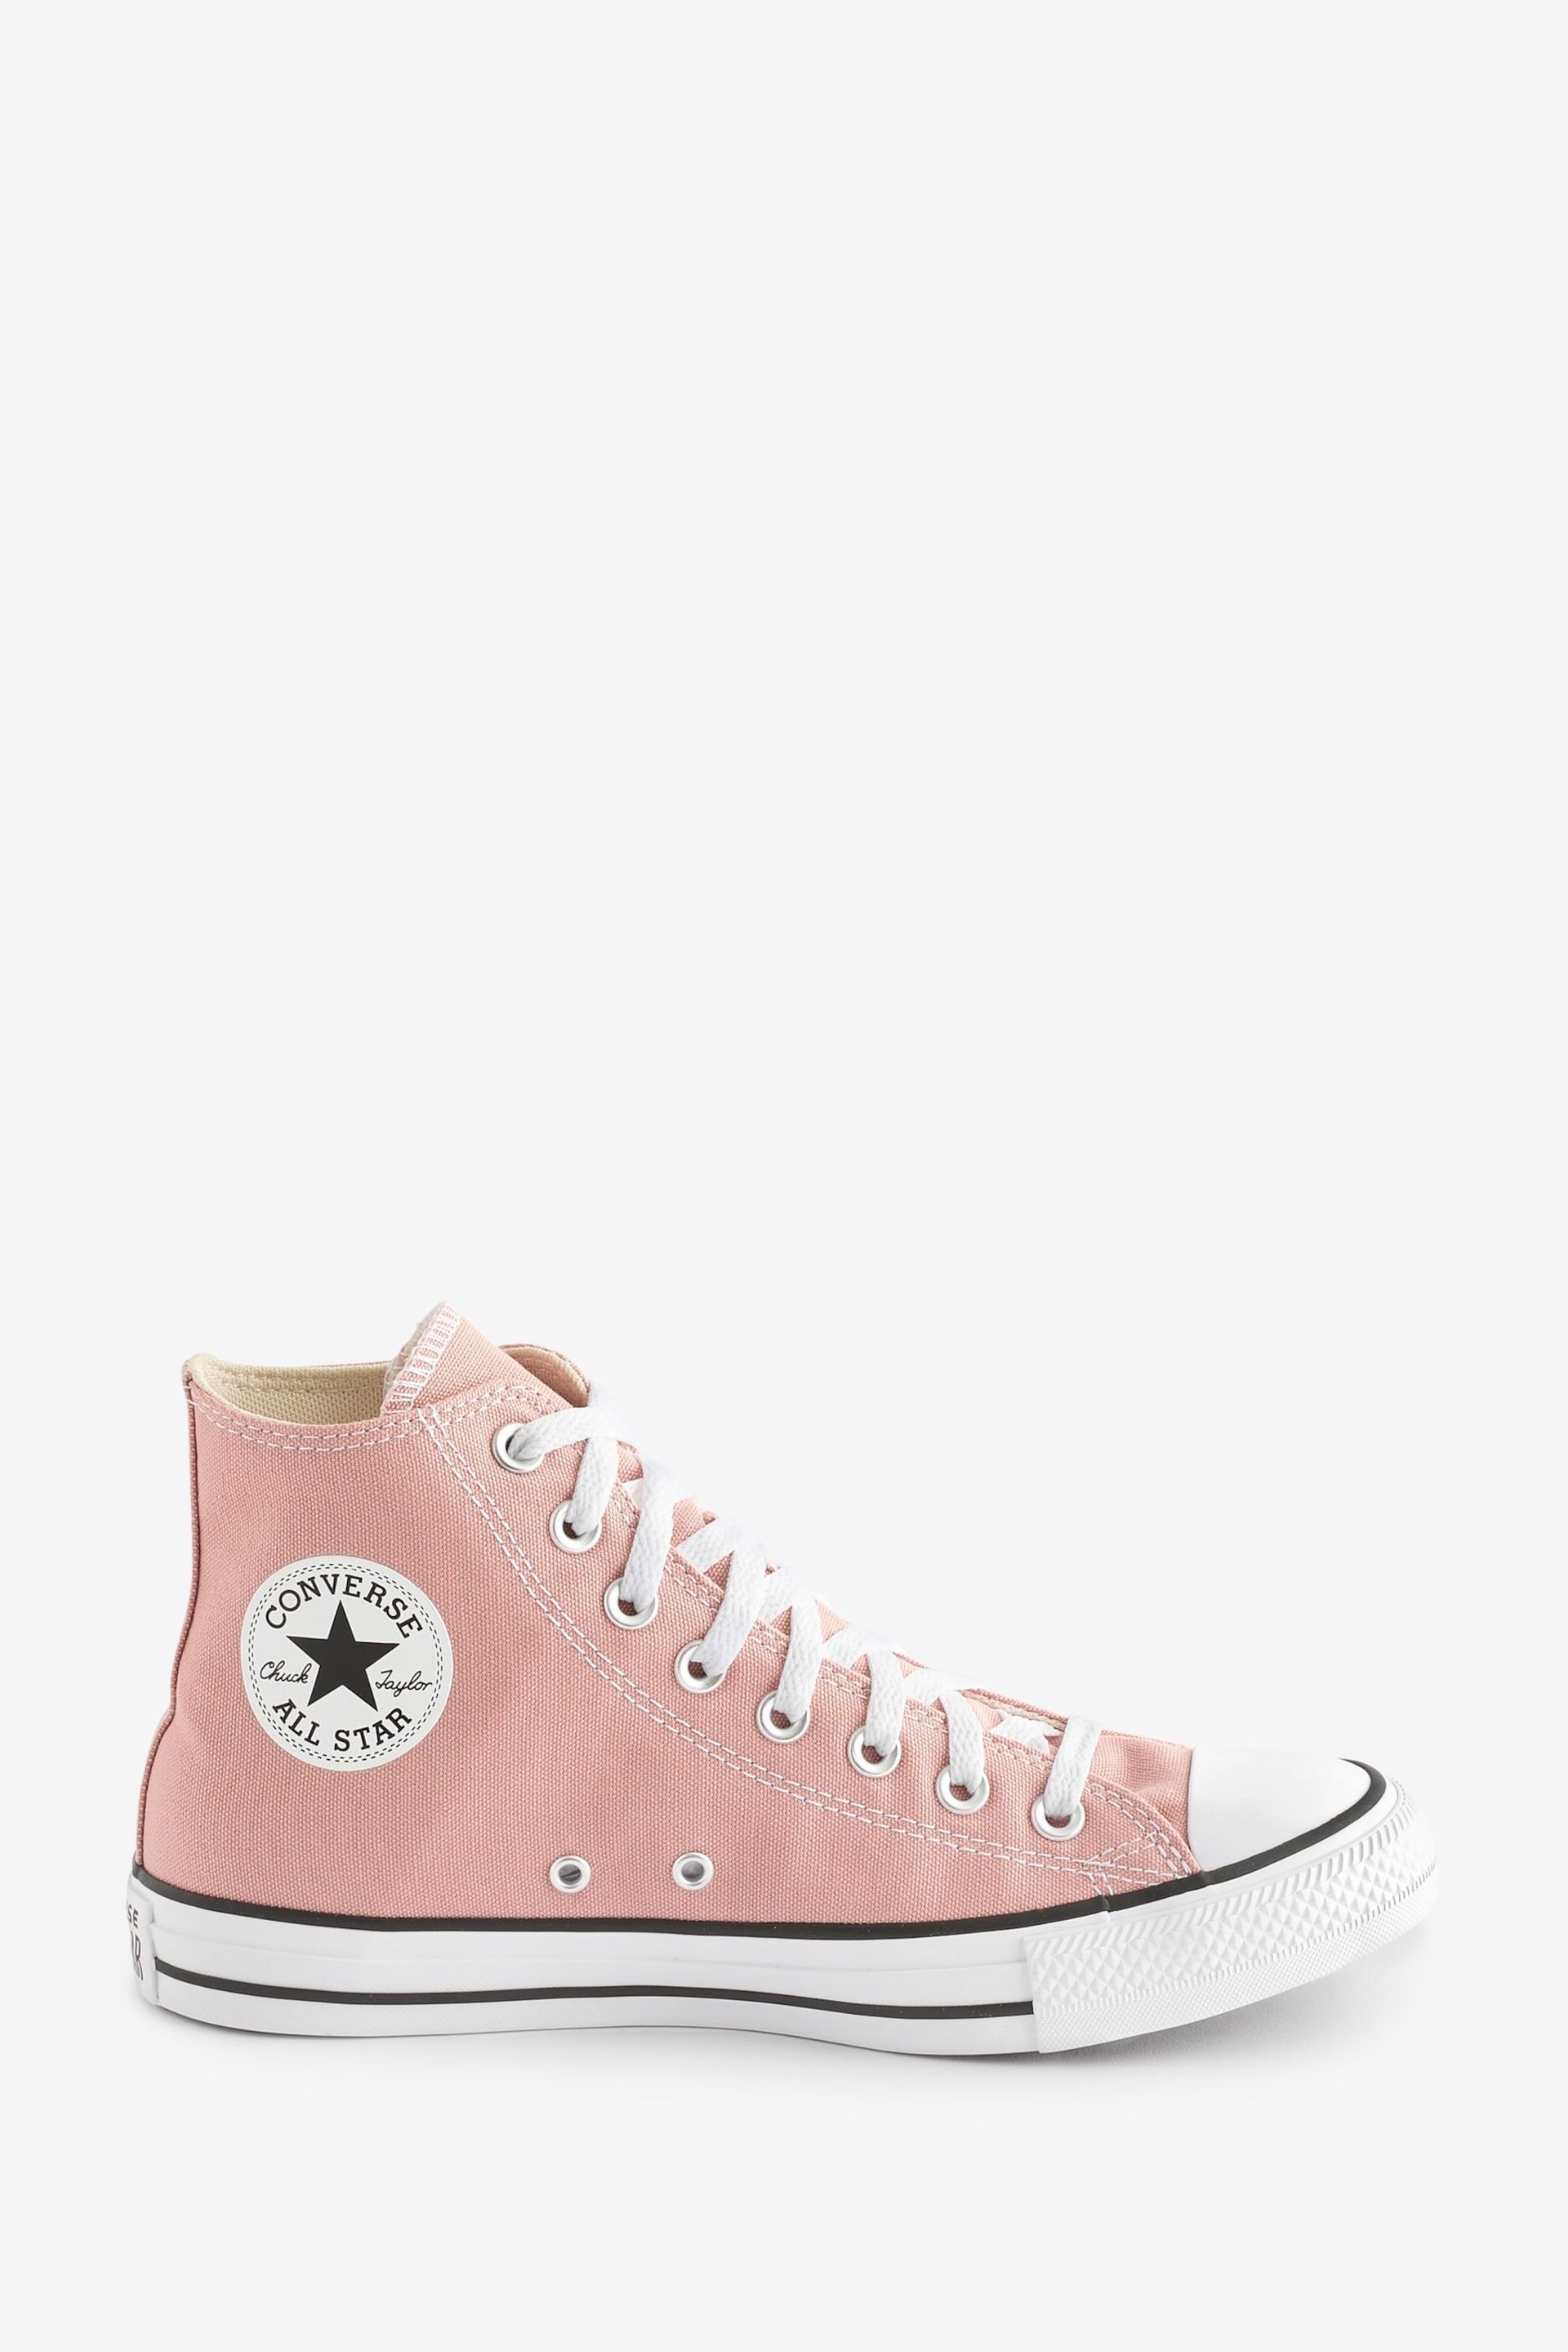 Converse Light Pink Chuck Taylor All Star High Trainers - Image 1 of 9